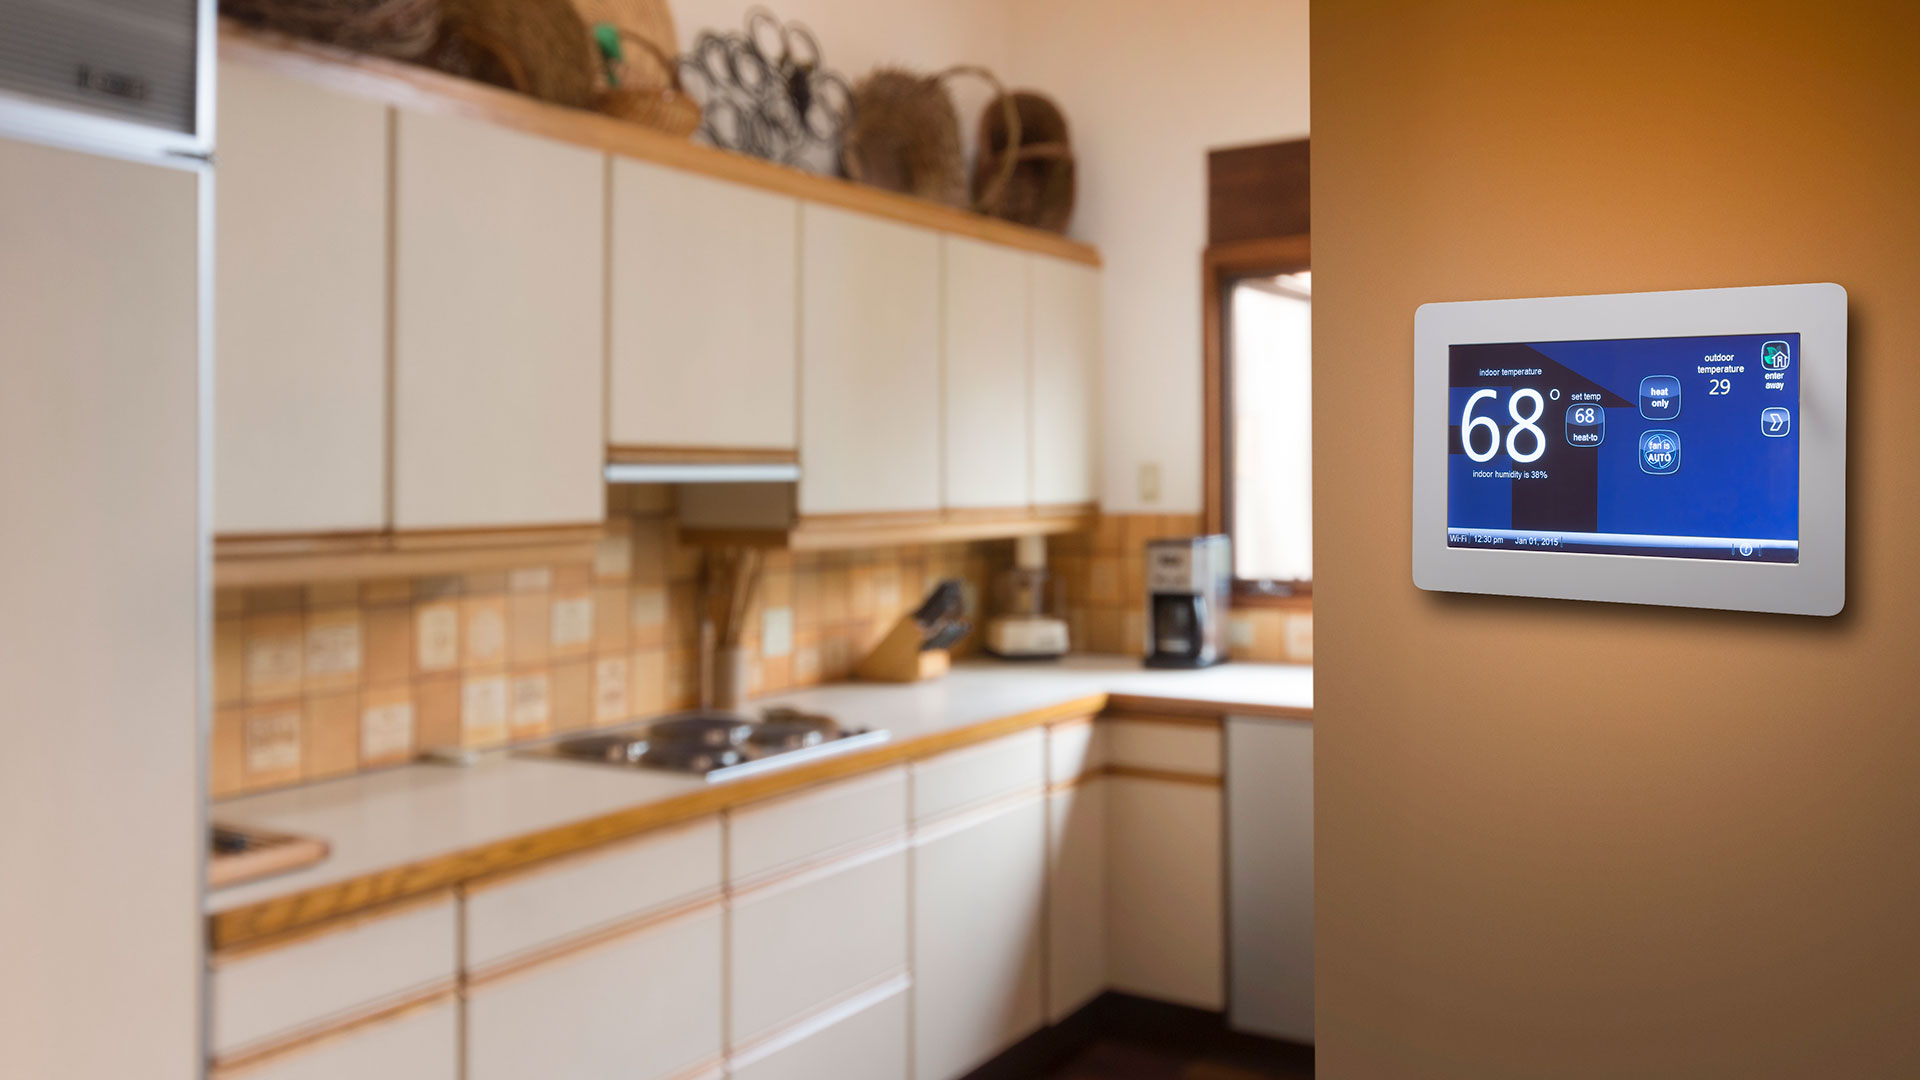 This smart thermostat installed on a wall in the kitchen works with a geothermal heat pump to provide warmth